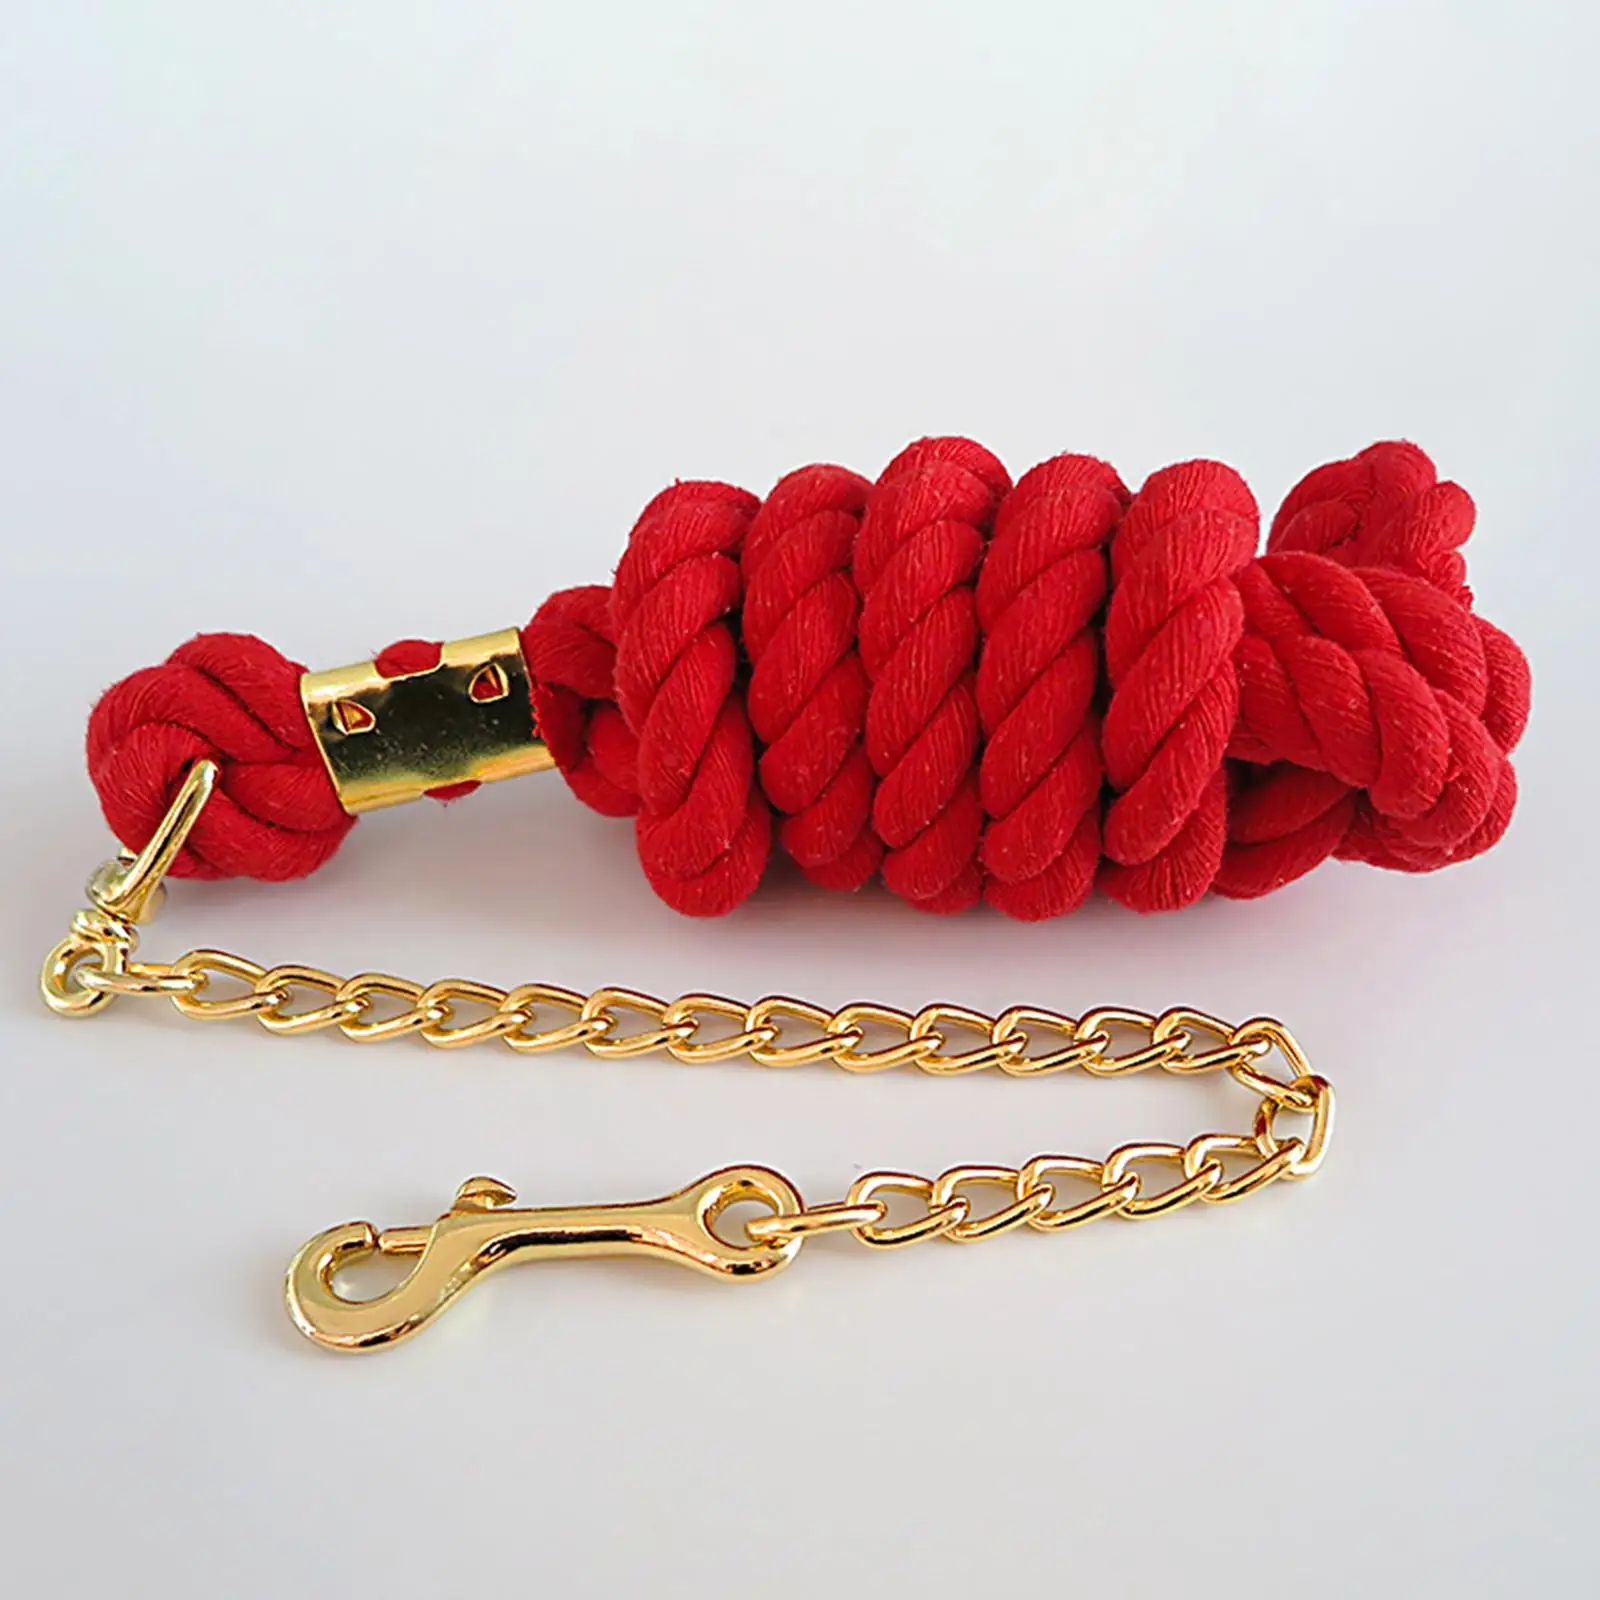 Solid Cotton Horse Leading Rope with Chain Durable Handmade Professional